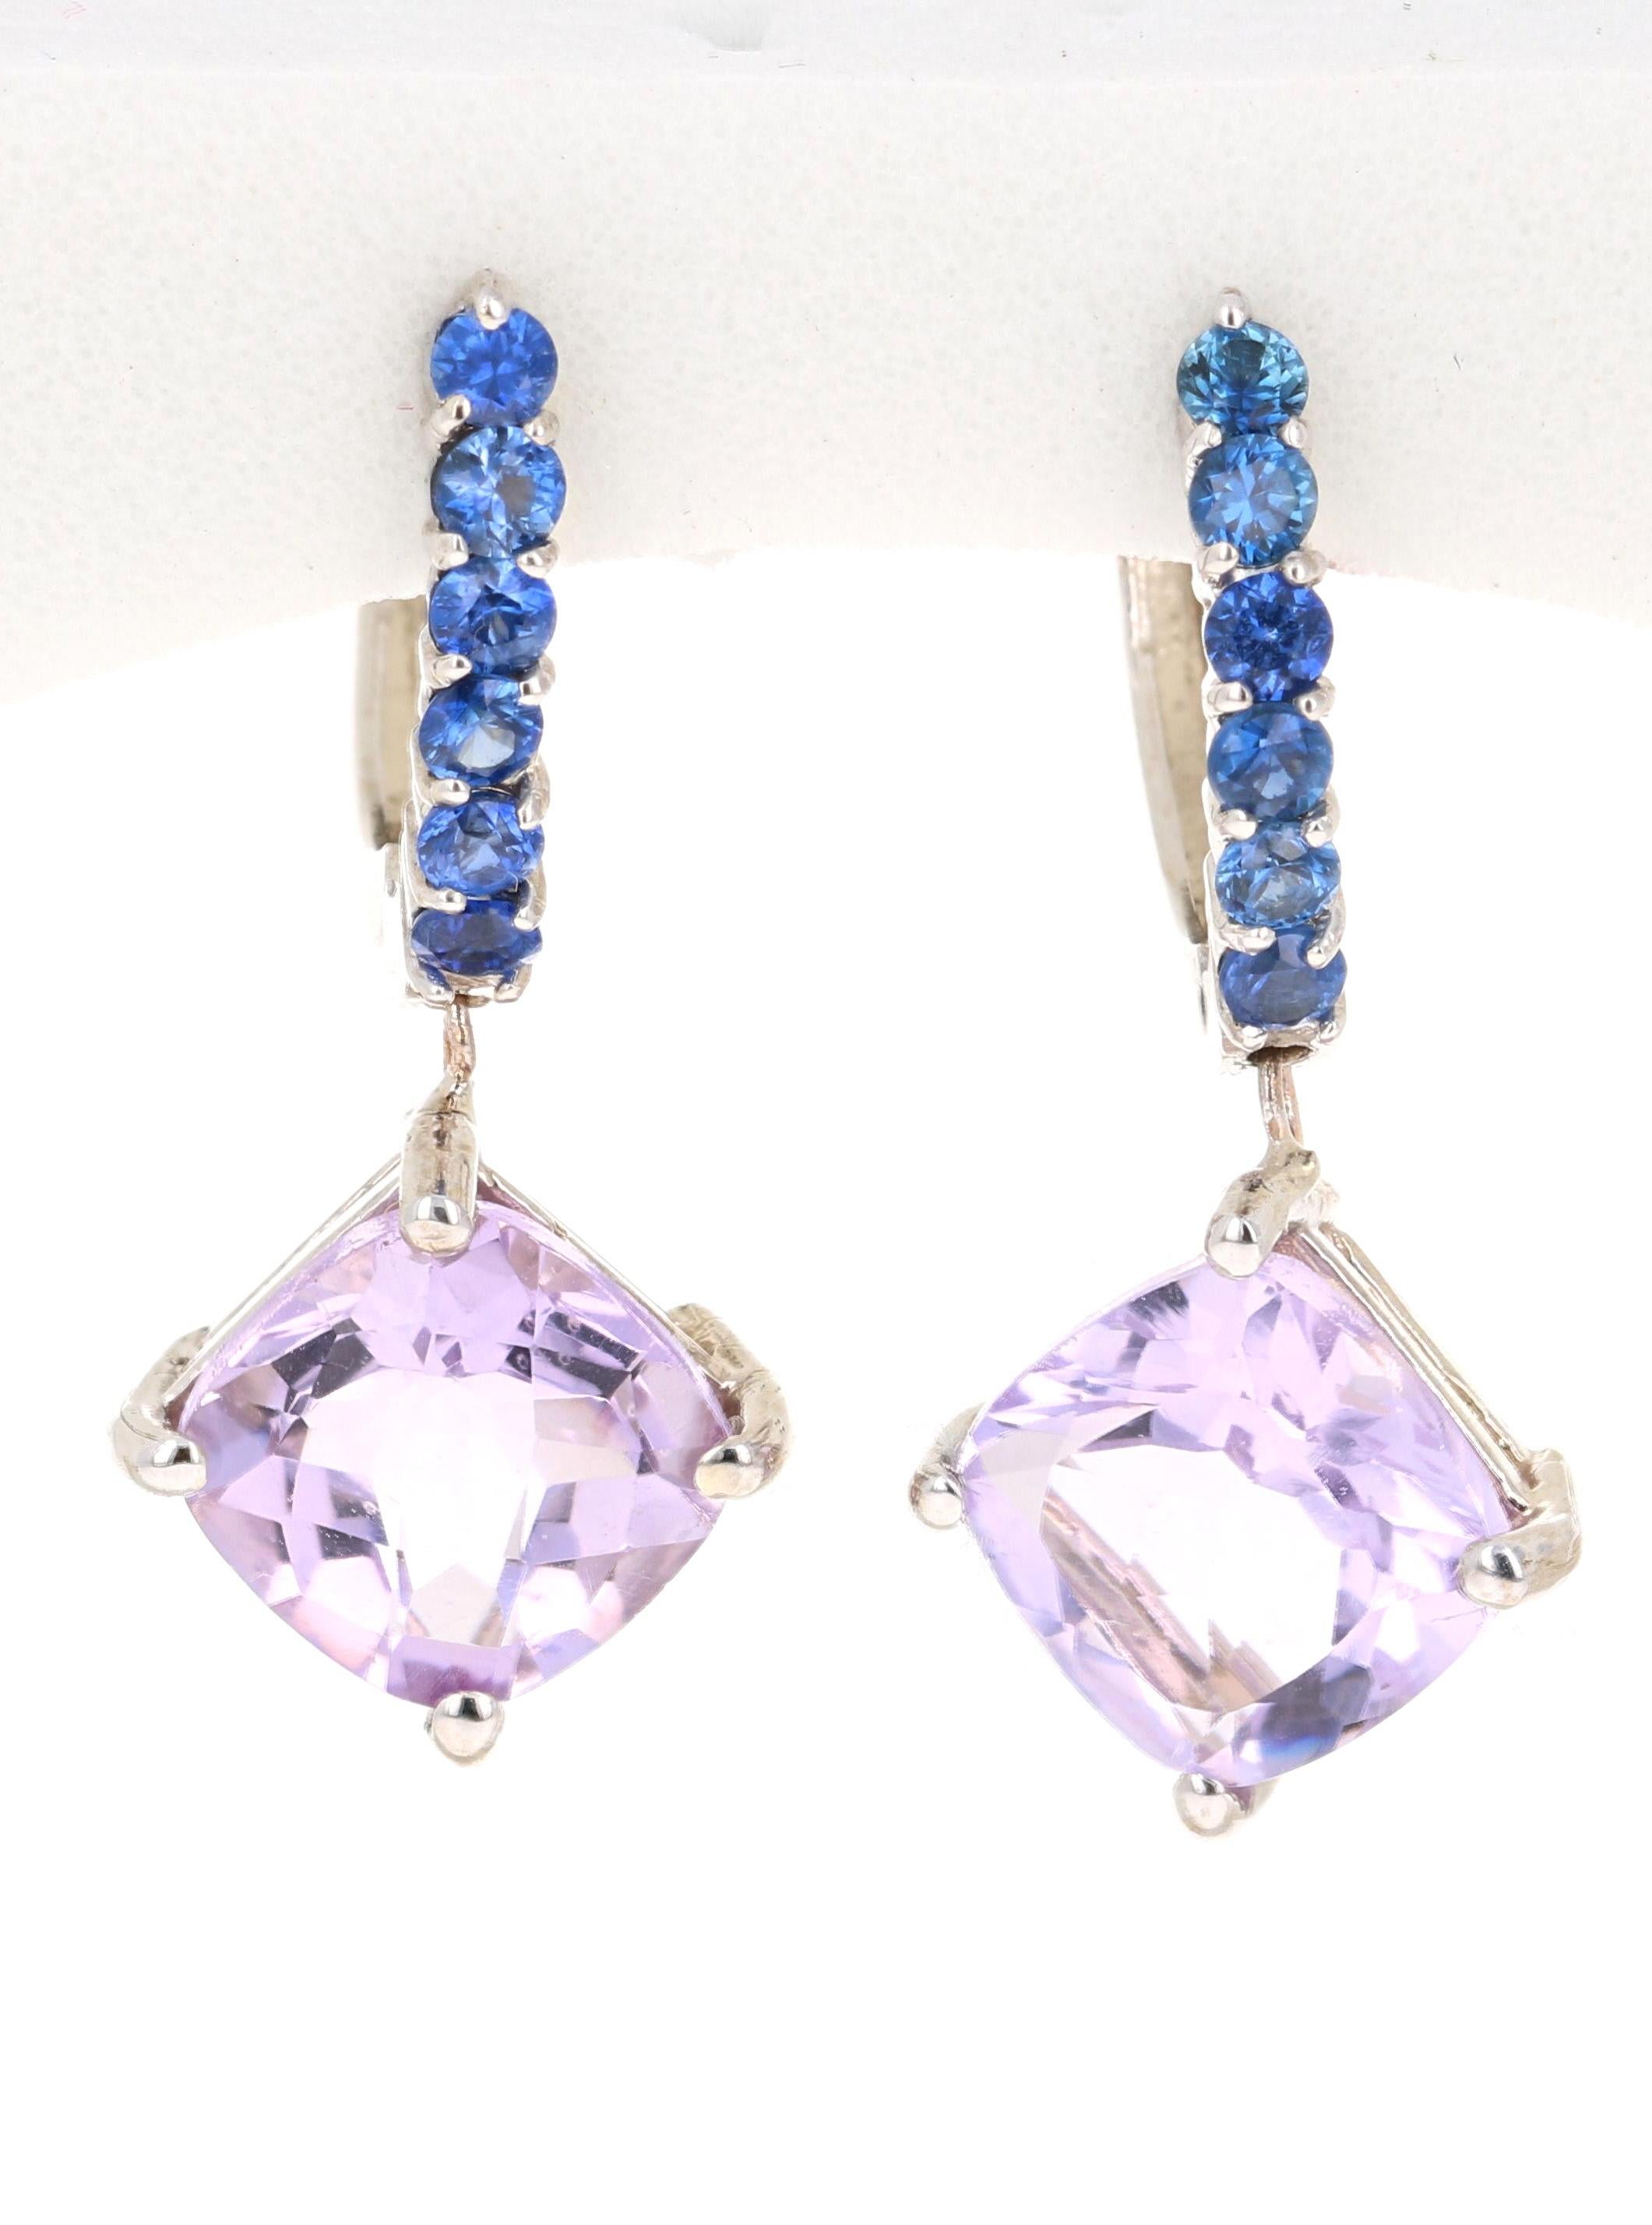 Amethyst and Blue Sapphire Drop Earrings! 

These stunning earrings have 2 Amethysts that weigh 4.02 Carats and are embellished with 12 Blue Sapphires that weigh 0.54 Carats. The total carat weight of the earrings are 4.56 Carats. 

They are